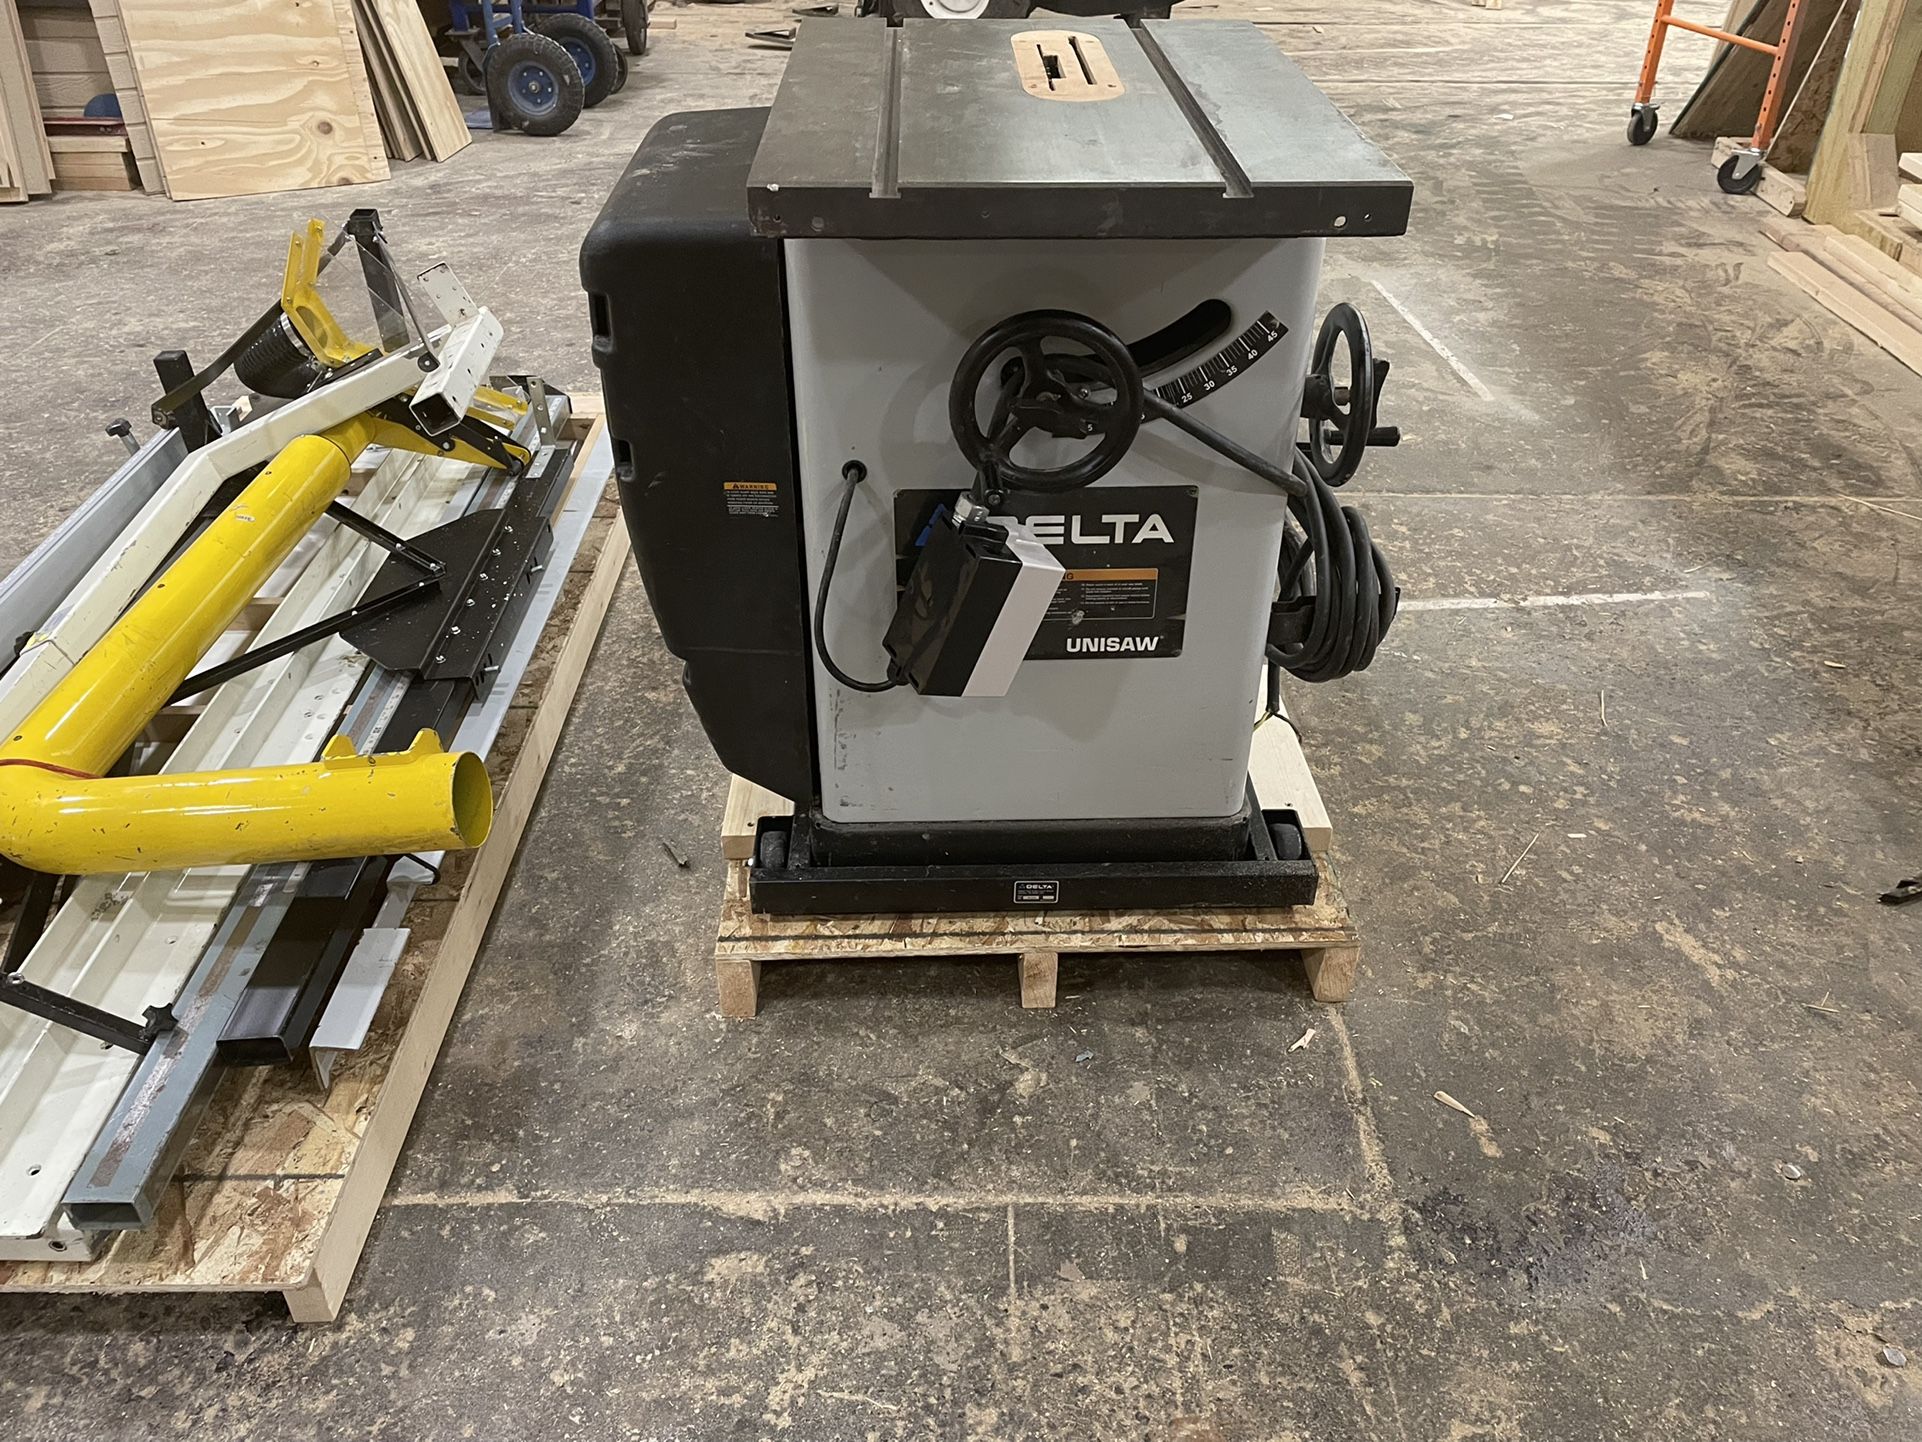 Delta Tablesaw - Unisaw